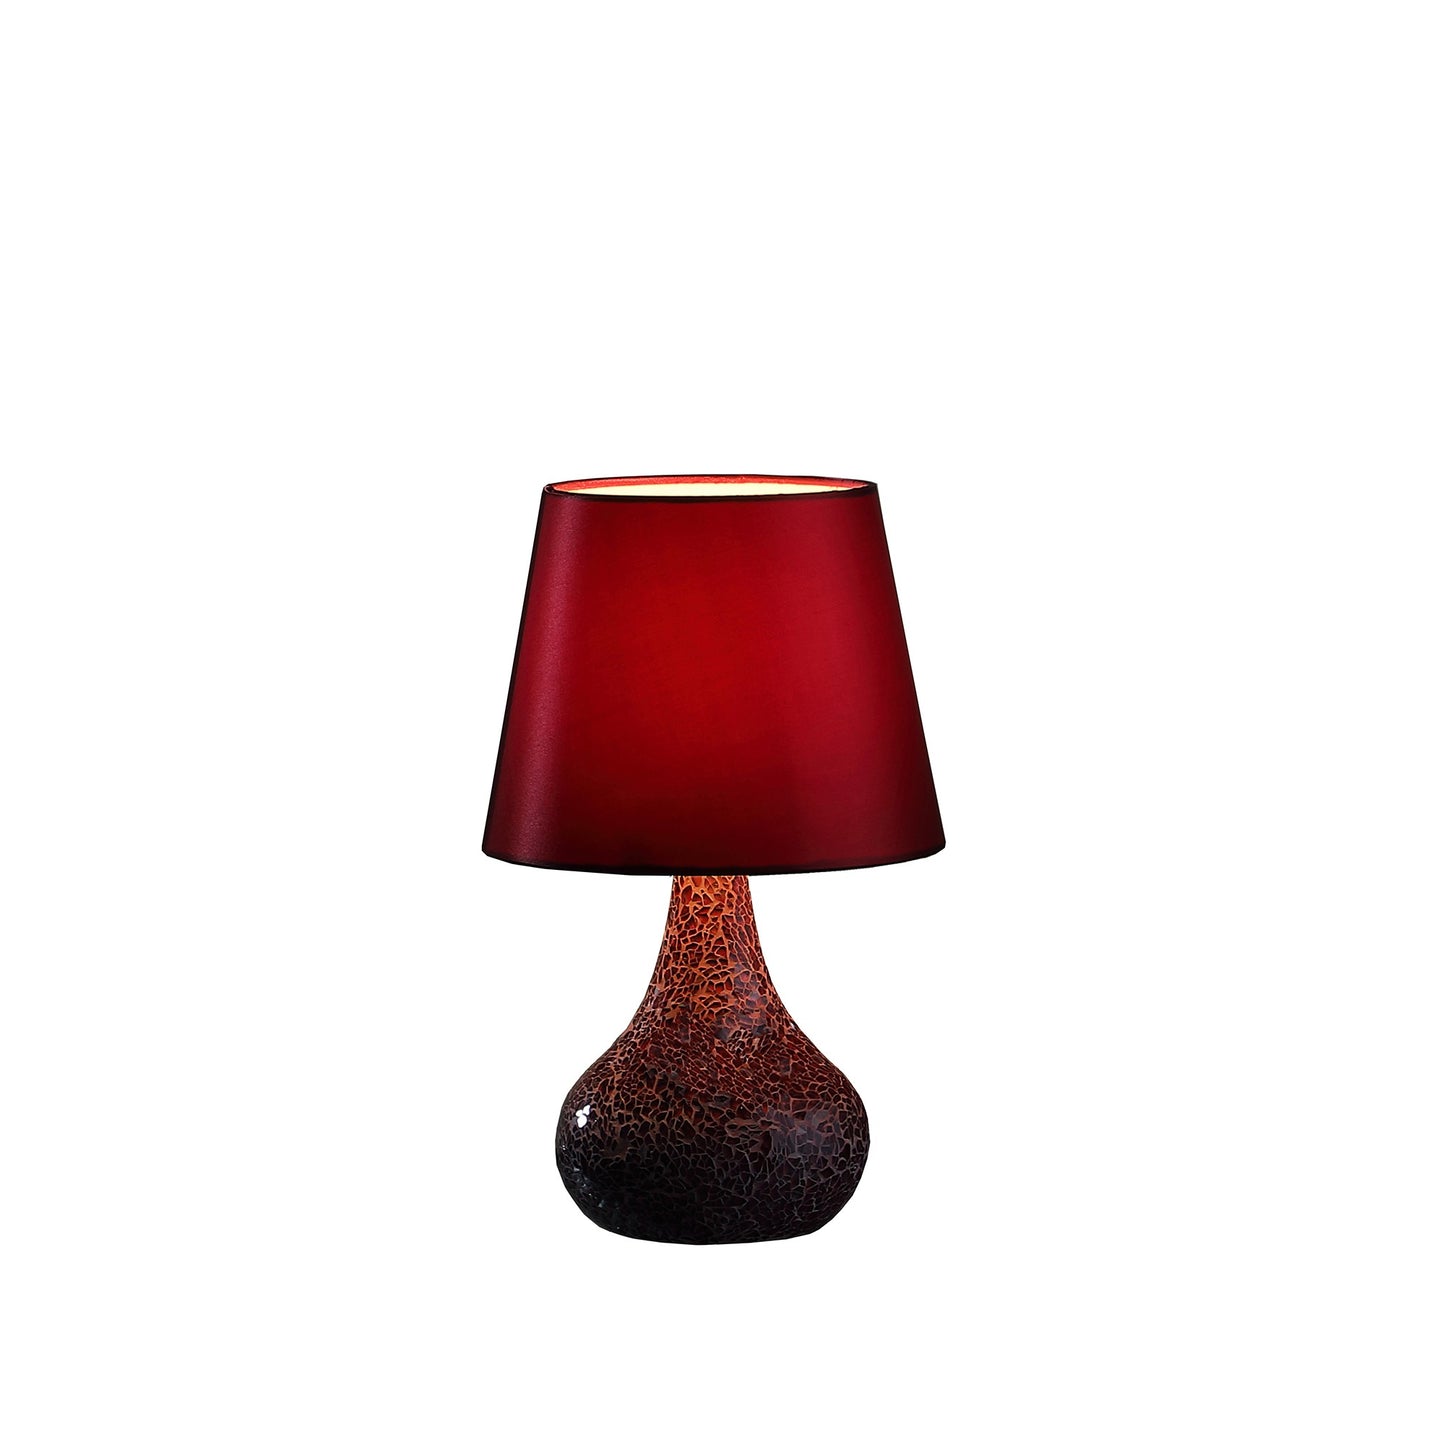 11" Red Resin and Glass Mosaic Crackle Accent Lamp With Burgundy Drum Shade